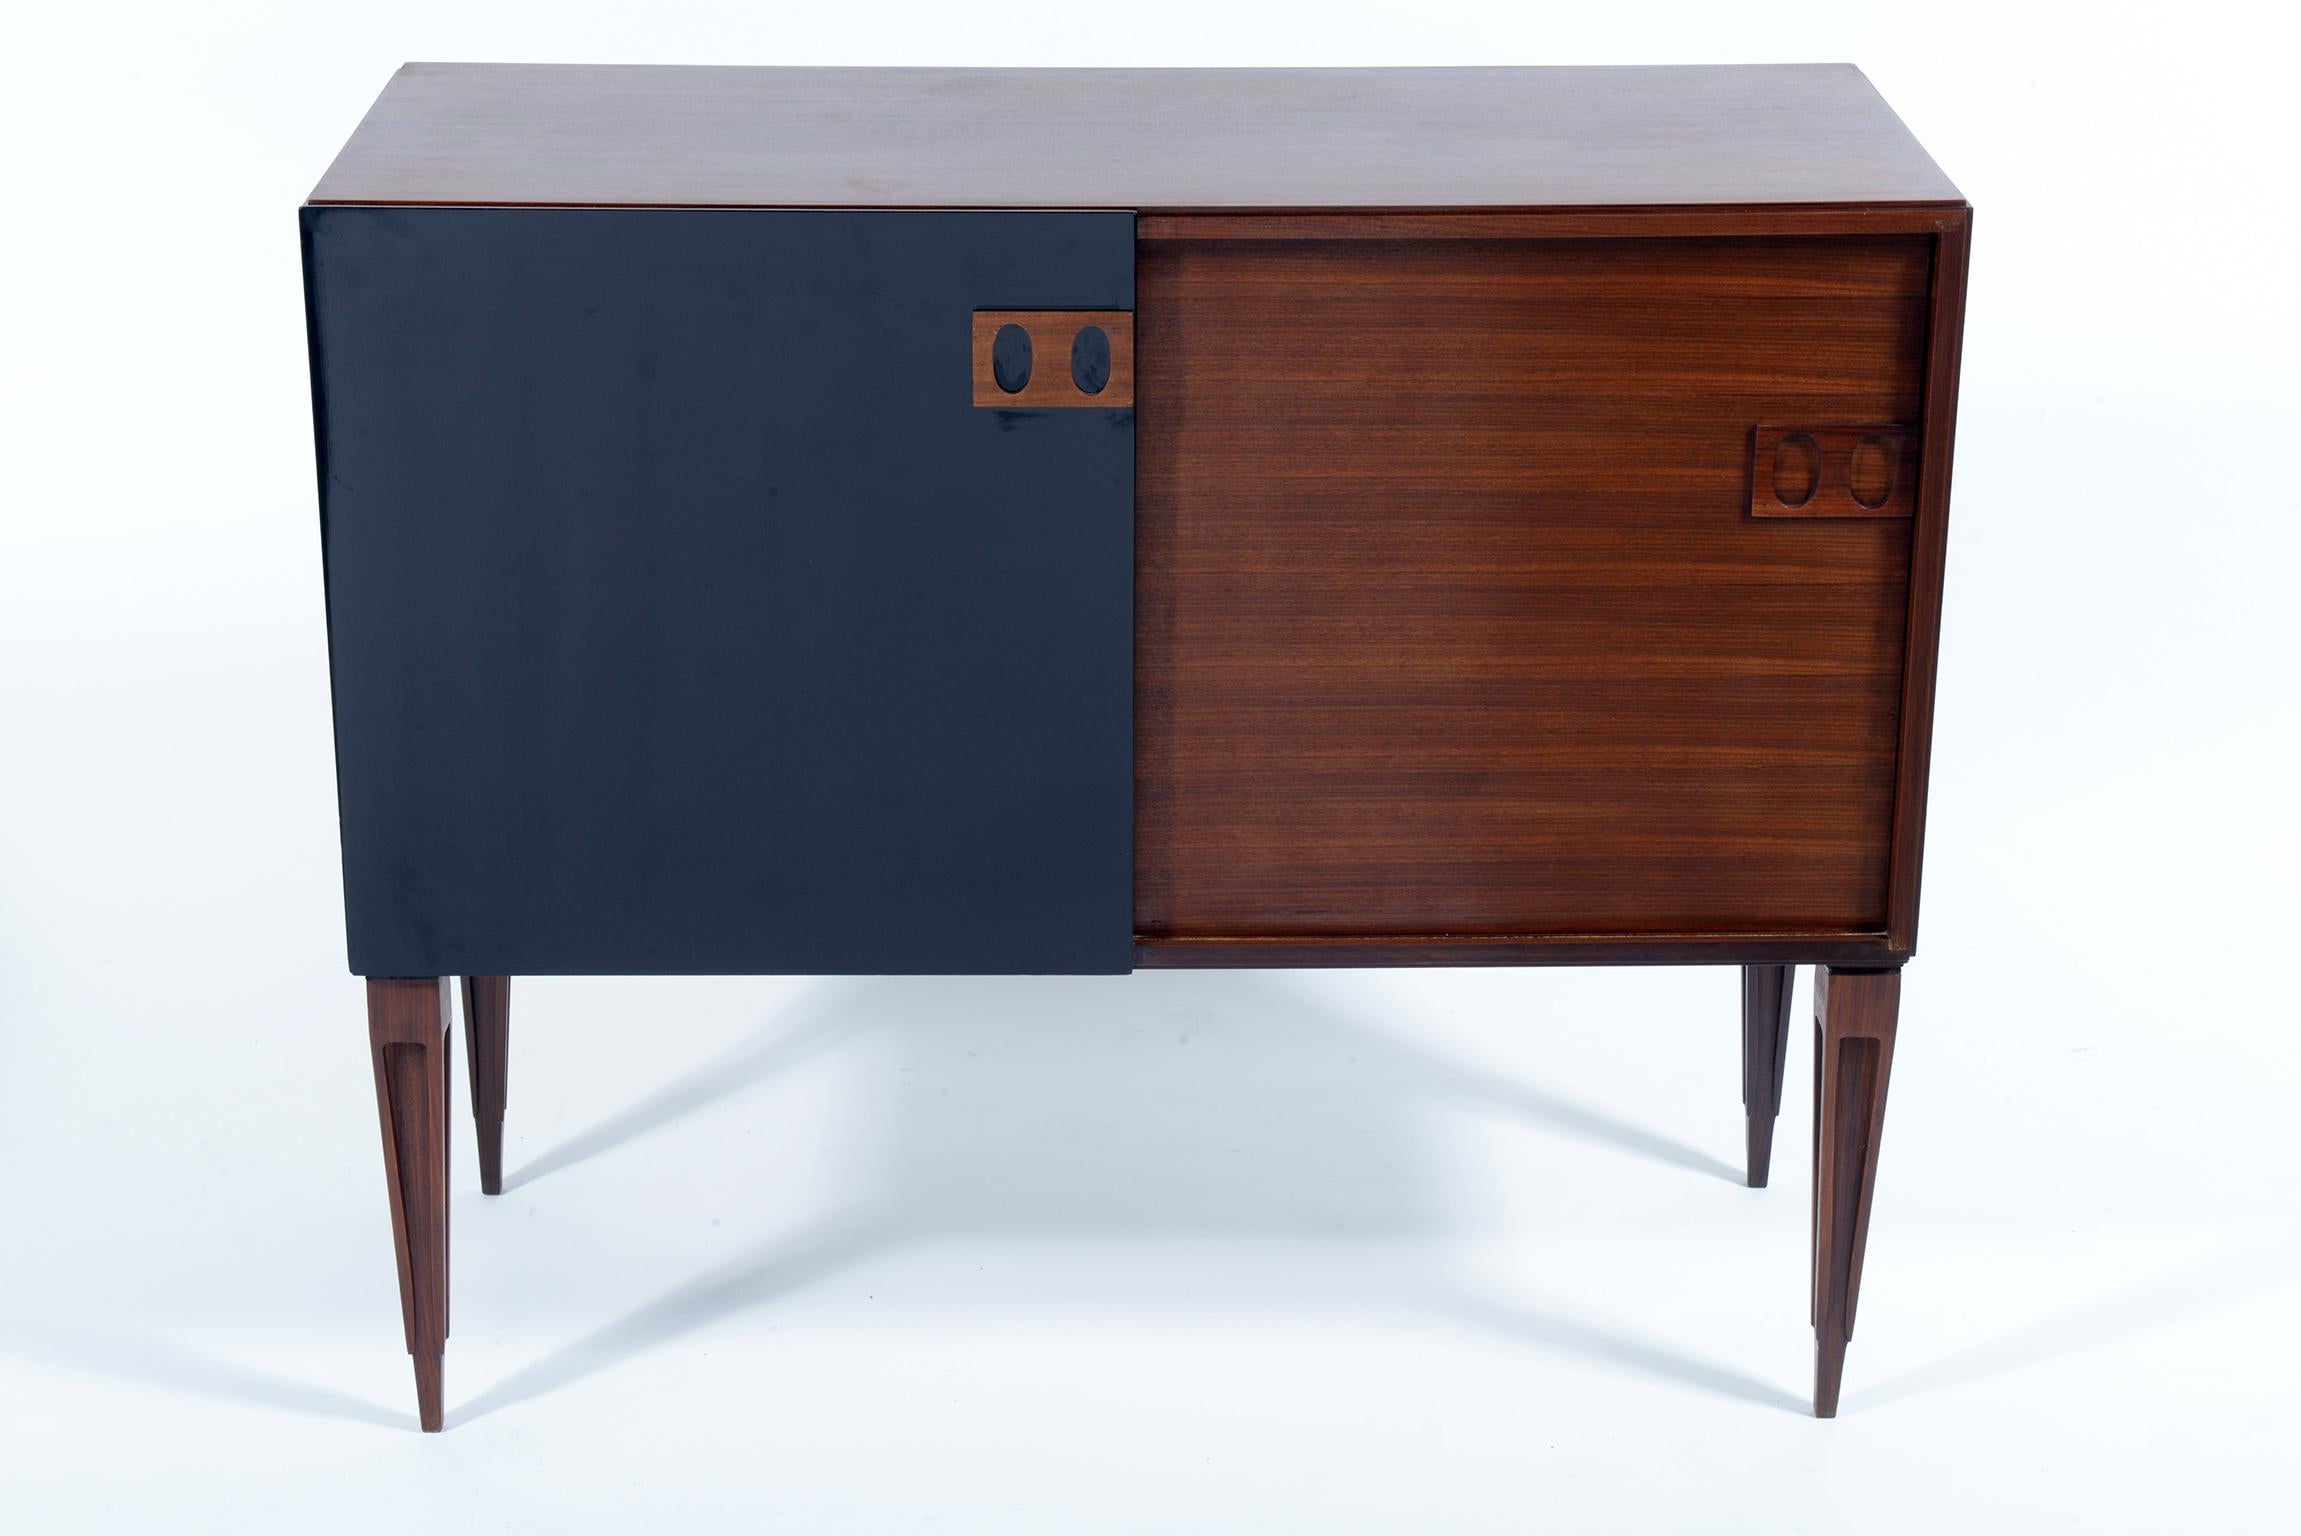 High quality of construction.
Teak wood structures and black lacquered doors.
Signed with Fire Mark by F.lli Proserpio, circa 1960.
Two sliding doors each cabinet with teak shelve inside.
Solid teak sculptured stylish legs.
The cabinet is finished